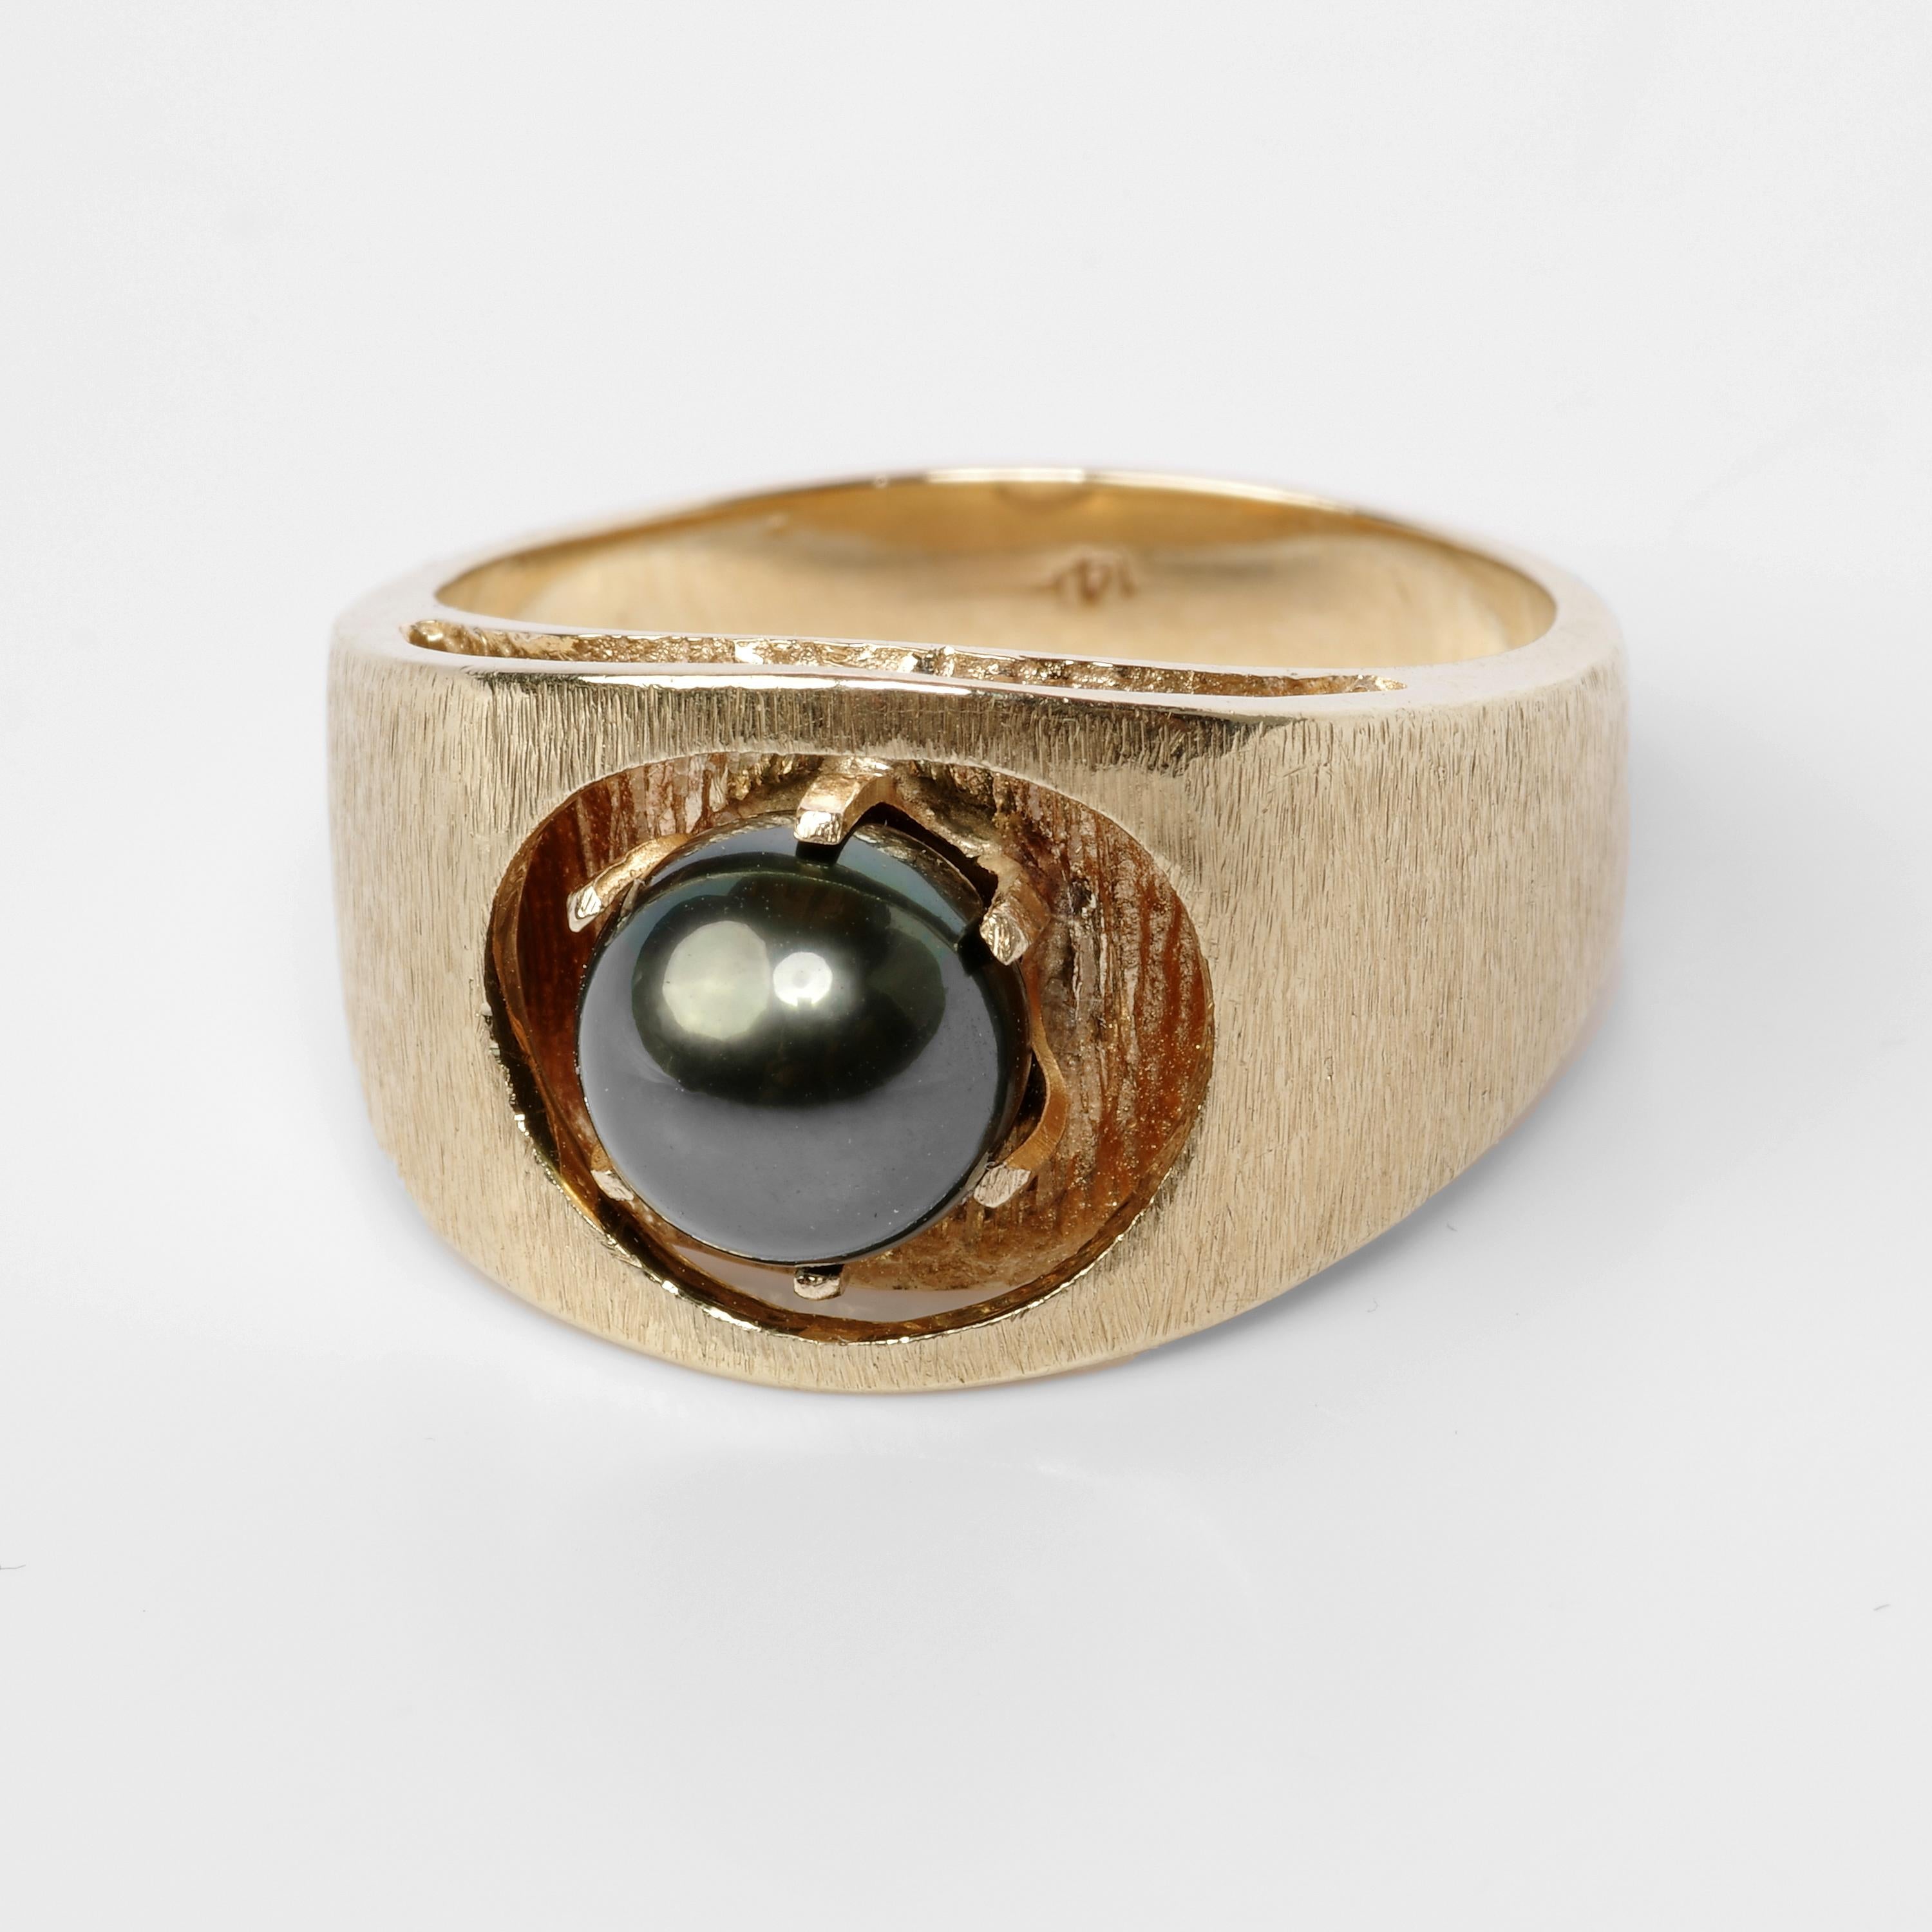 This circa 1970s men's ring was created in 14K yellow gold and features an 8.5mm cultured Tahitian pearl dramatically set into a lower-level platform and secured by six long prongs. From every angle, this ring is a work of dazzling Mid-century art.